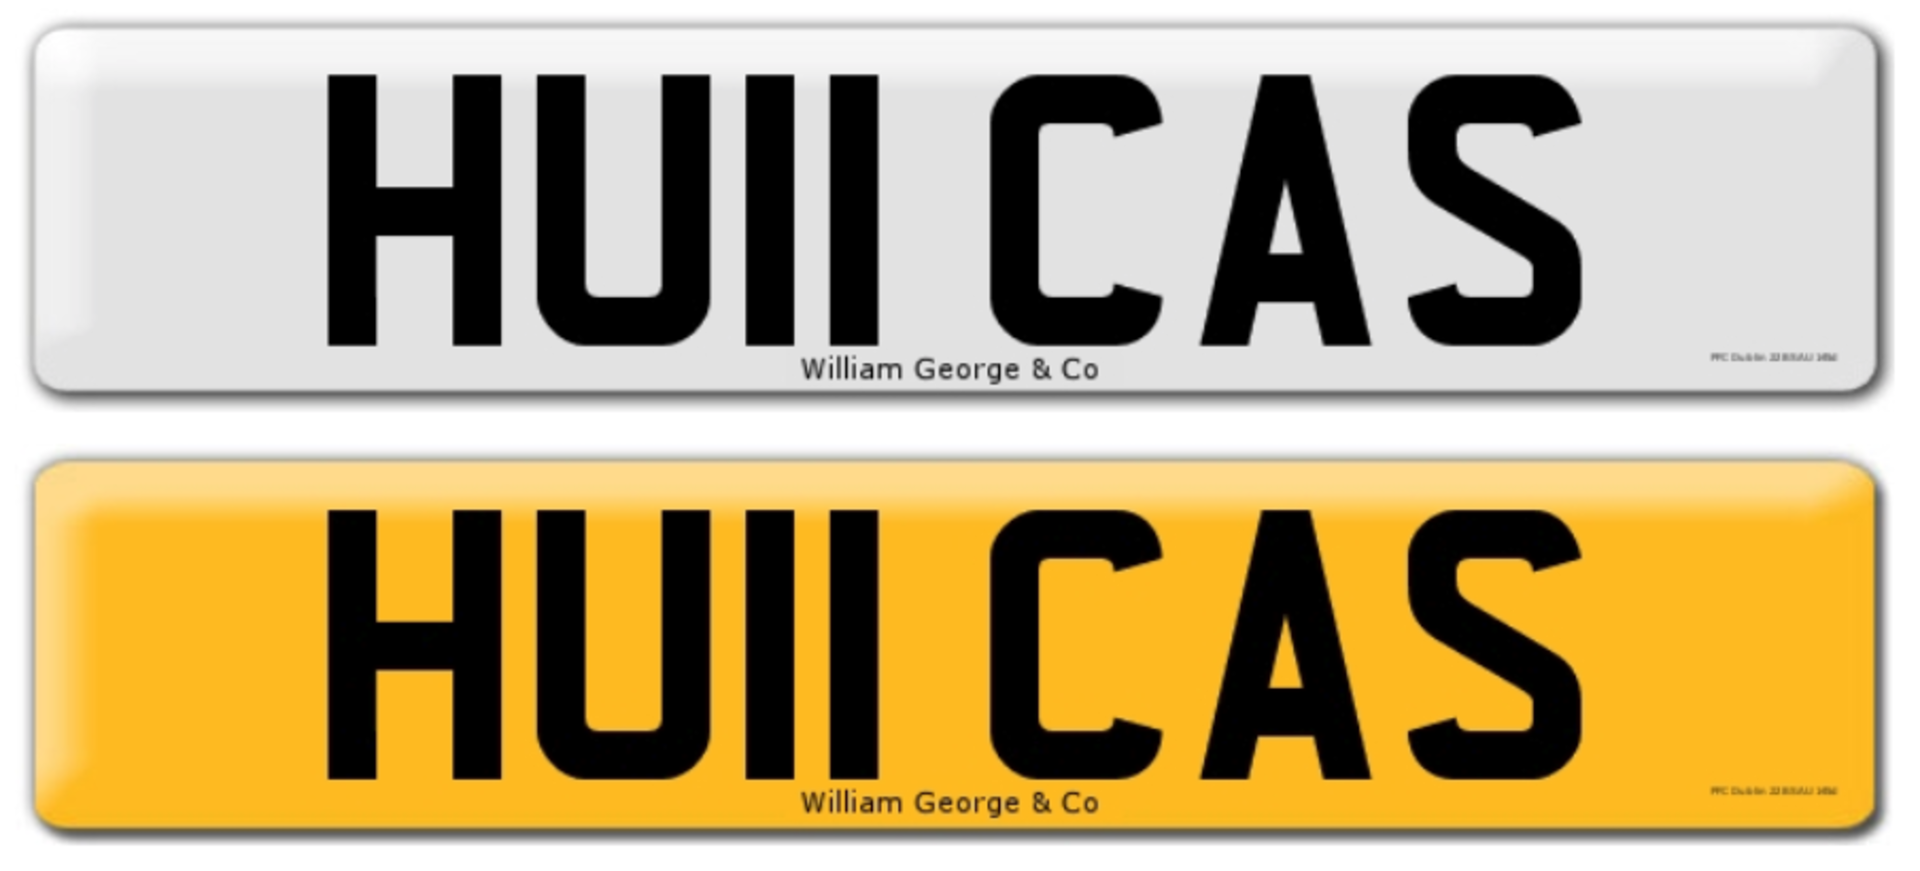 Registration on DVLA retention certificate, ready to transfer HU11 CAS, This number plate /